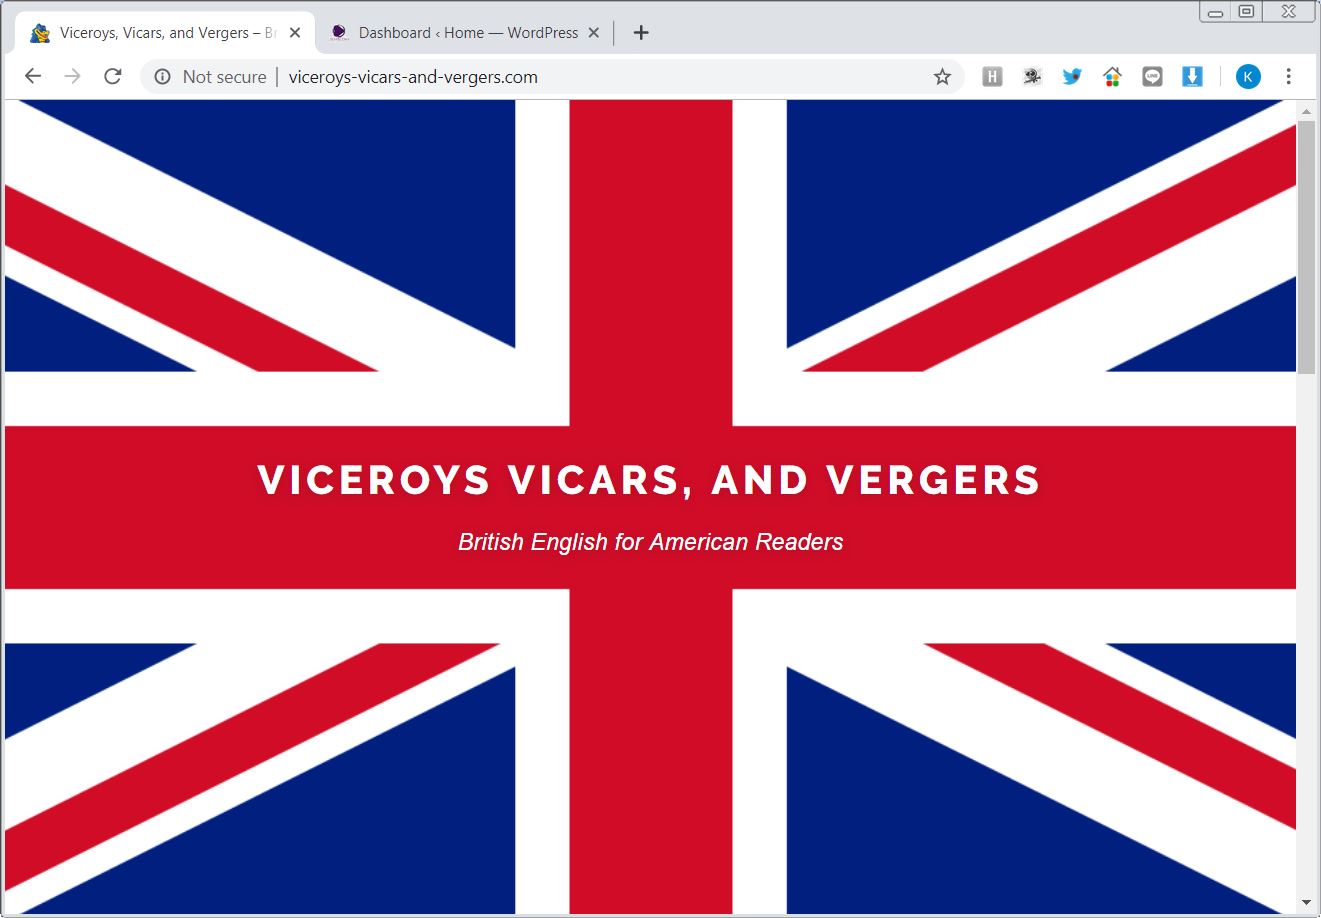 Viceroys Vicars and Vergers